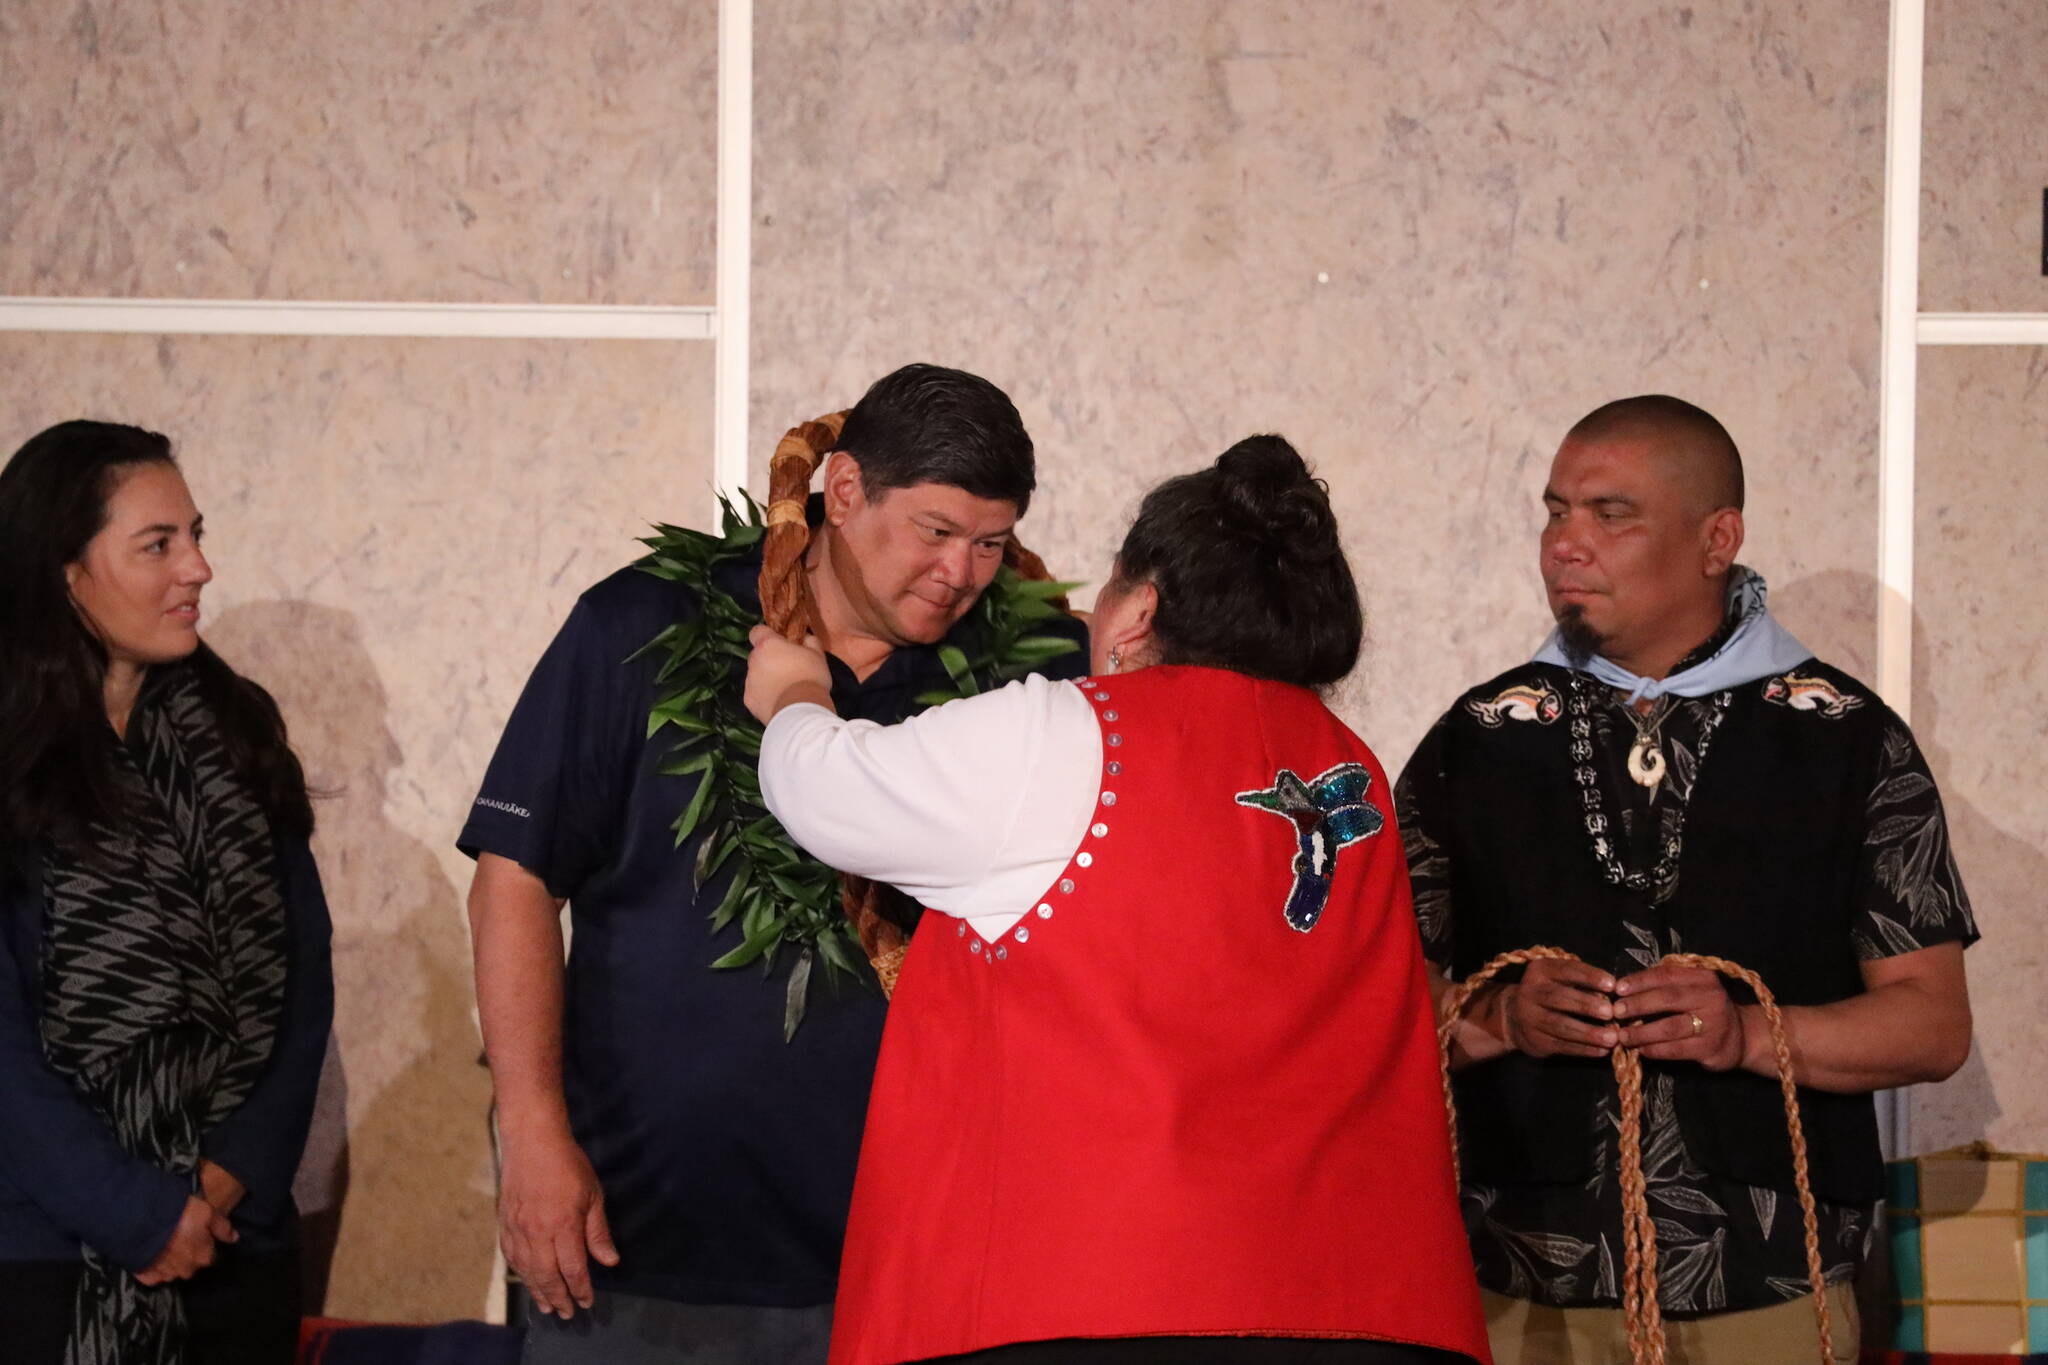 Capt. Mark Ellis receives a ceremonial cedar rope alongside other captains during a blessing ceremony at the global launch ceremony of the Moananuiākea voyage at the University of Alaska Recreation Center Thursday afternoon. (Clarise Larson / Juneau Empire)